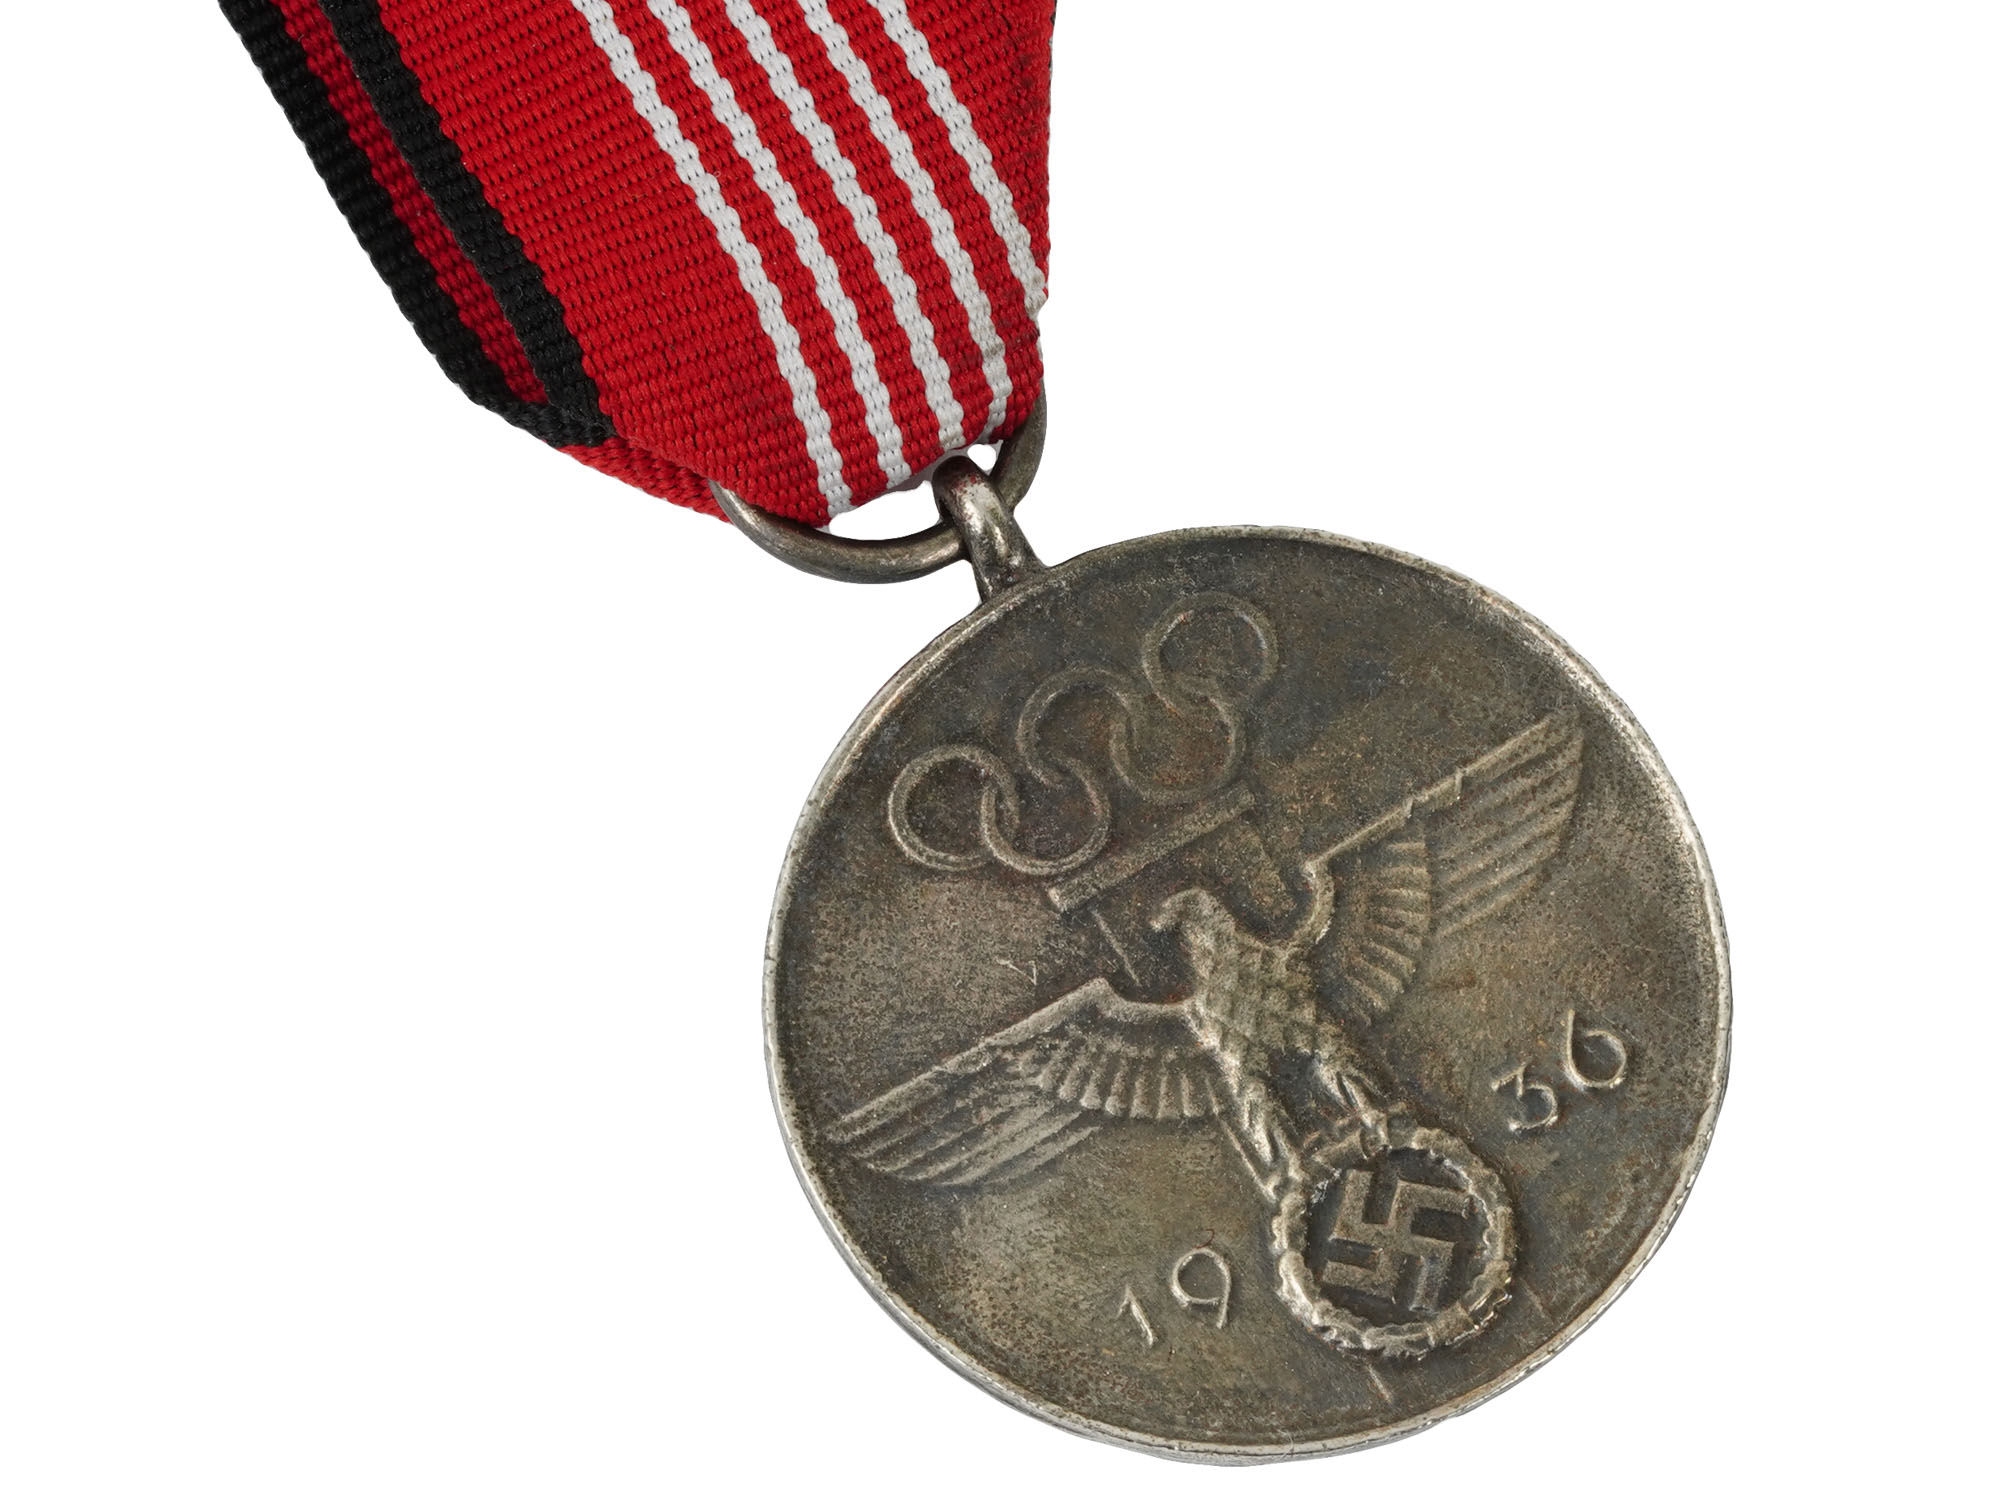 NAZI GERMAN 1936 OLYMPIC MEDAL AND BLOOD ORDER PIC-3